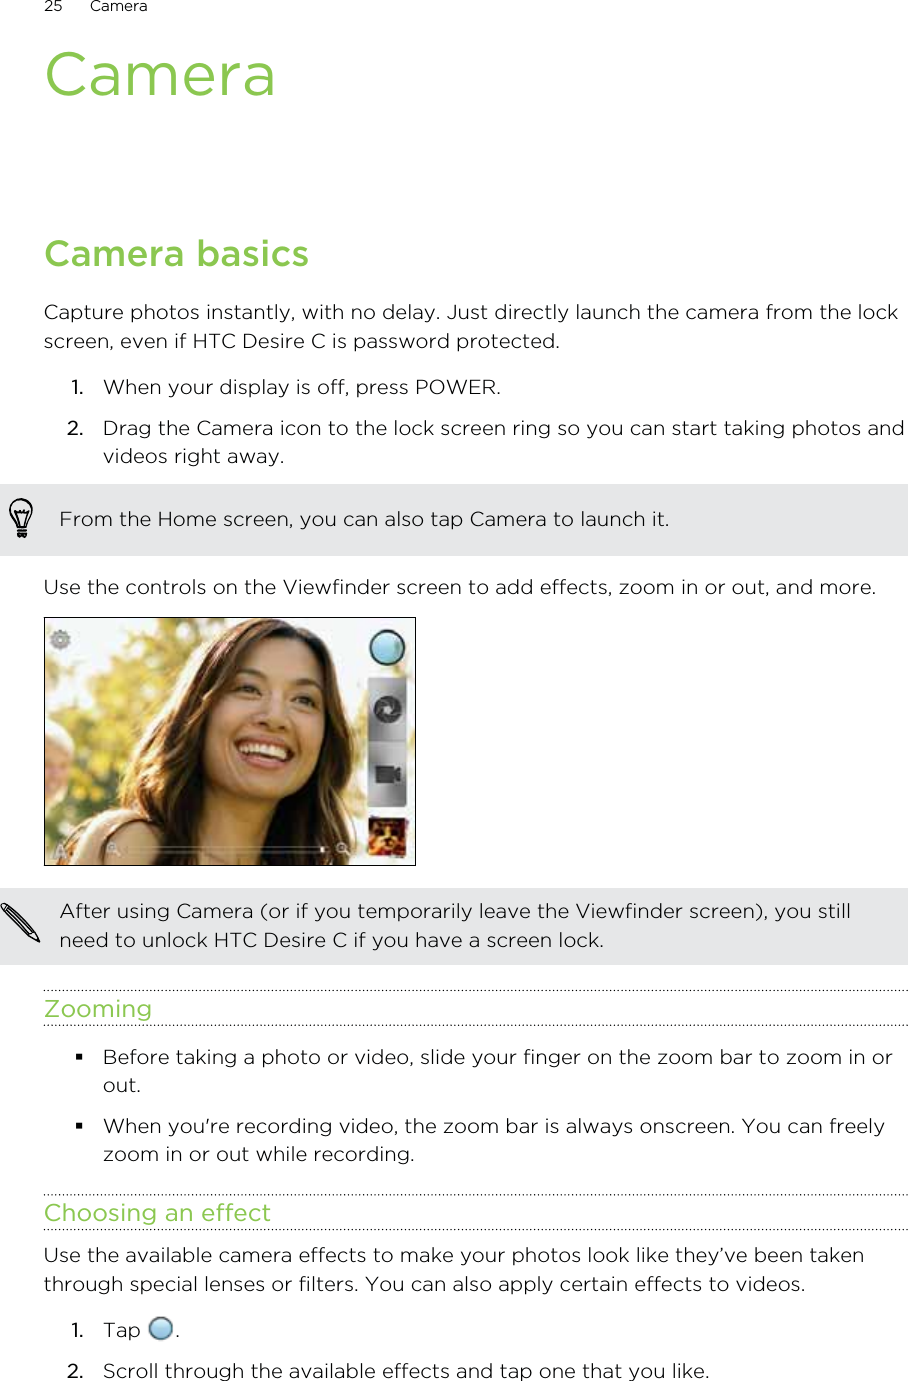 CameraCamera basicsCapture photos instantly, with no delay. Just directly launch the camera from the lockscreen, even if HTC Desire C is password protected.1. When your display is off, press POWER.2. Drag the Camera icon to the lock screen ring so you can start taking photos andvideos right away. From the Home screen, you can also tap Camera to launch it.Use the controls on the Viewfinder screen to add effects, zoom in or out, and more.After using Camera (or if you temporarily leave the Viewfinder screen), you stillneed to unlock HTC Desire C if you have a screen lock.ZoomingBefore taking a photo or video, slide your finger on the zoom bar to zoom in orout.When you&apos;re recording video, the zoom bar is always onscreen. You can freelyzoom in or out while recording.Choosing an effectUse the available camera effects to make your photos look like they’ve been takenthrough special lenses or filters. You can also apply certain effects to videos.1. Tap  .2. Scroll through the available effects and tap one that you like.25 Camera